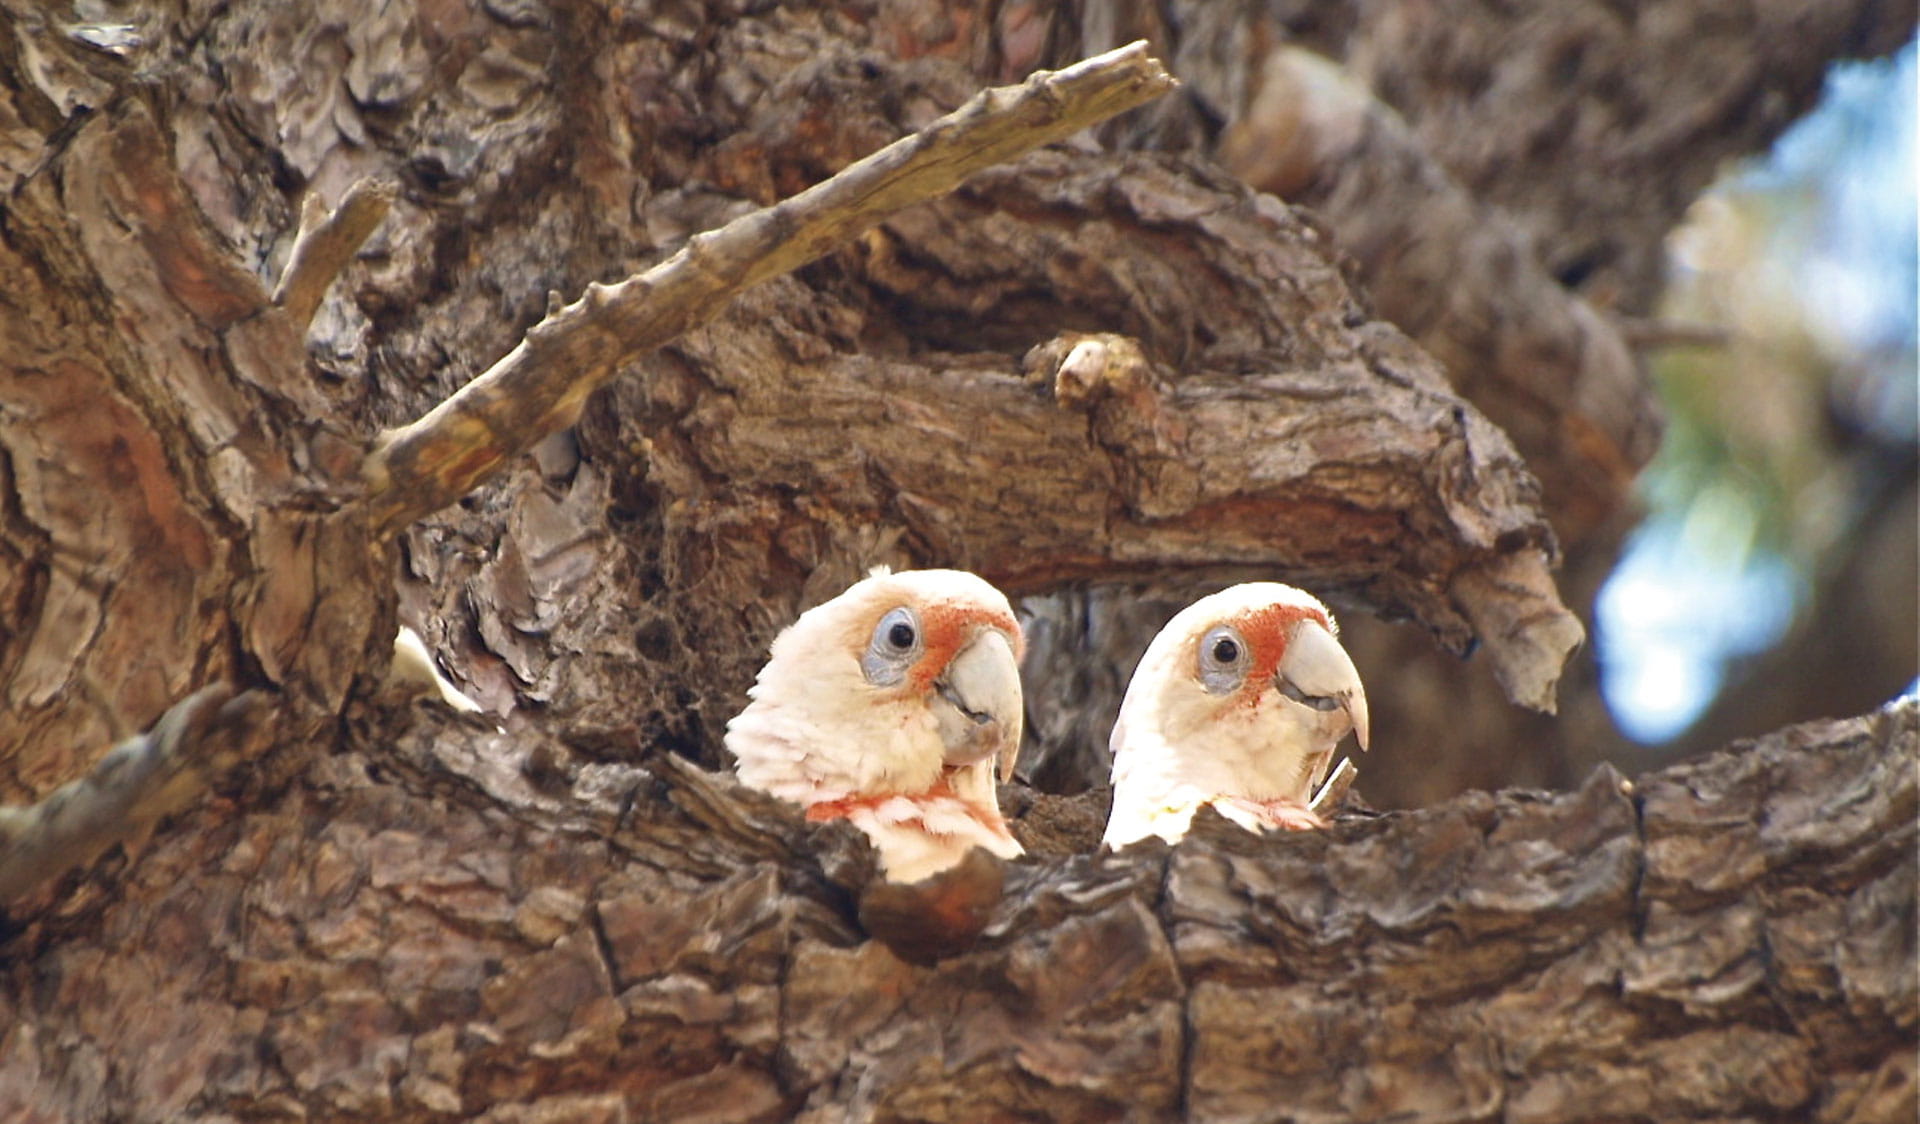 Pair of Long Billed Corellas nesting in a tree hollow.